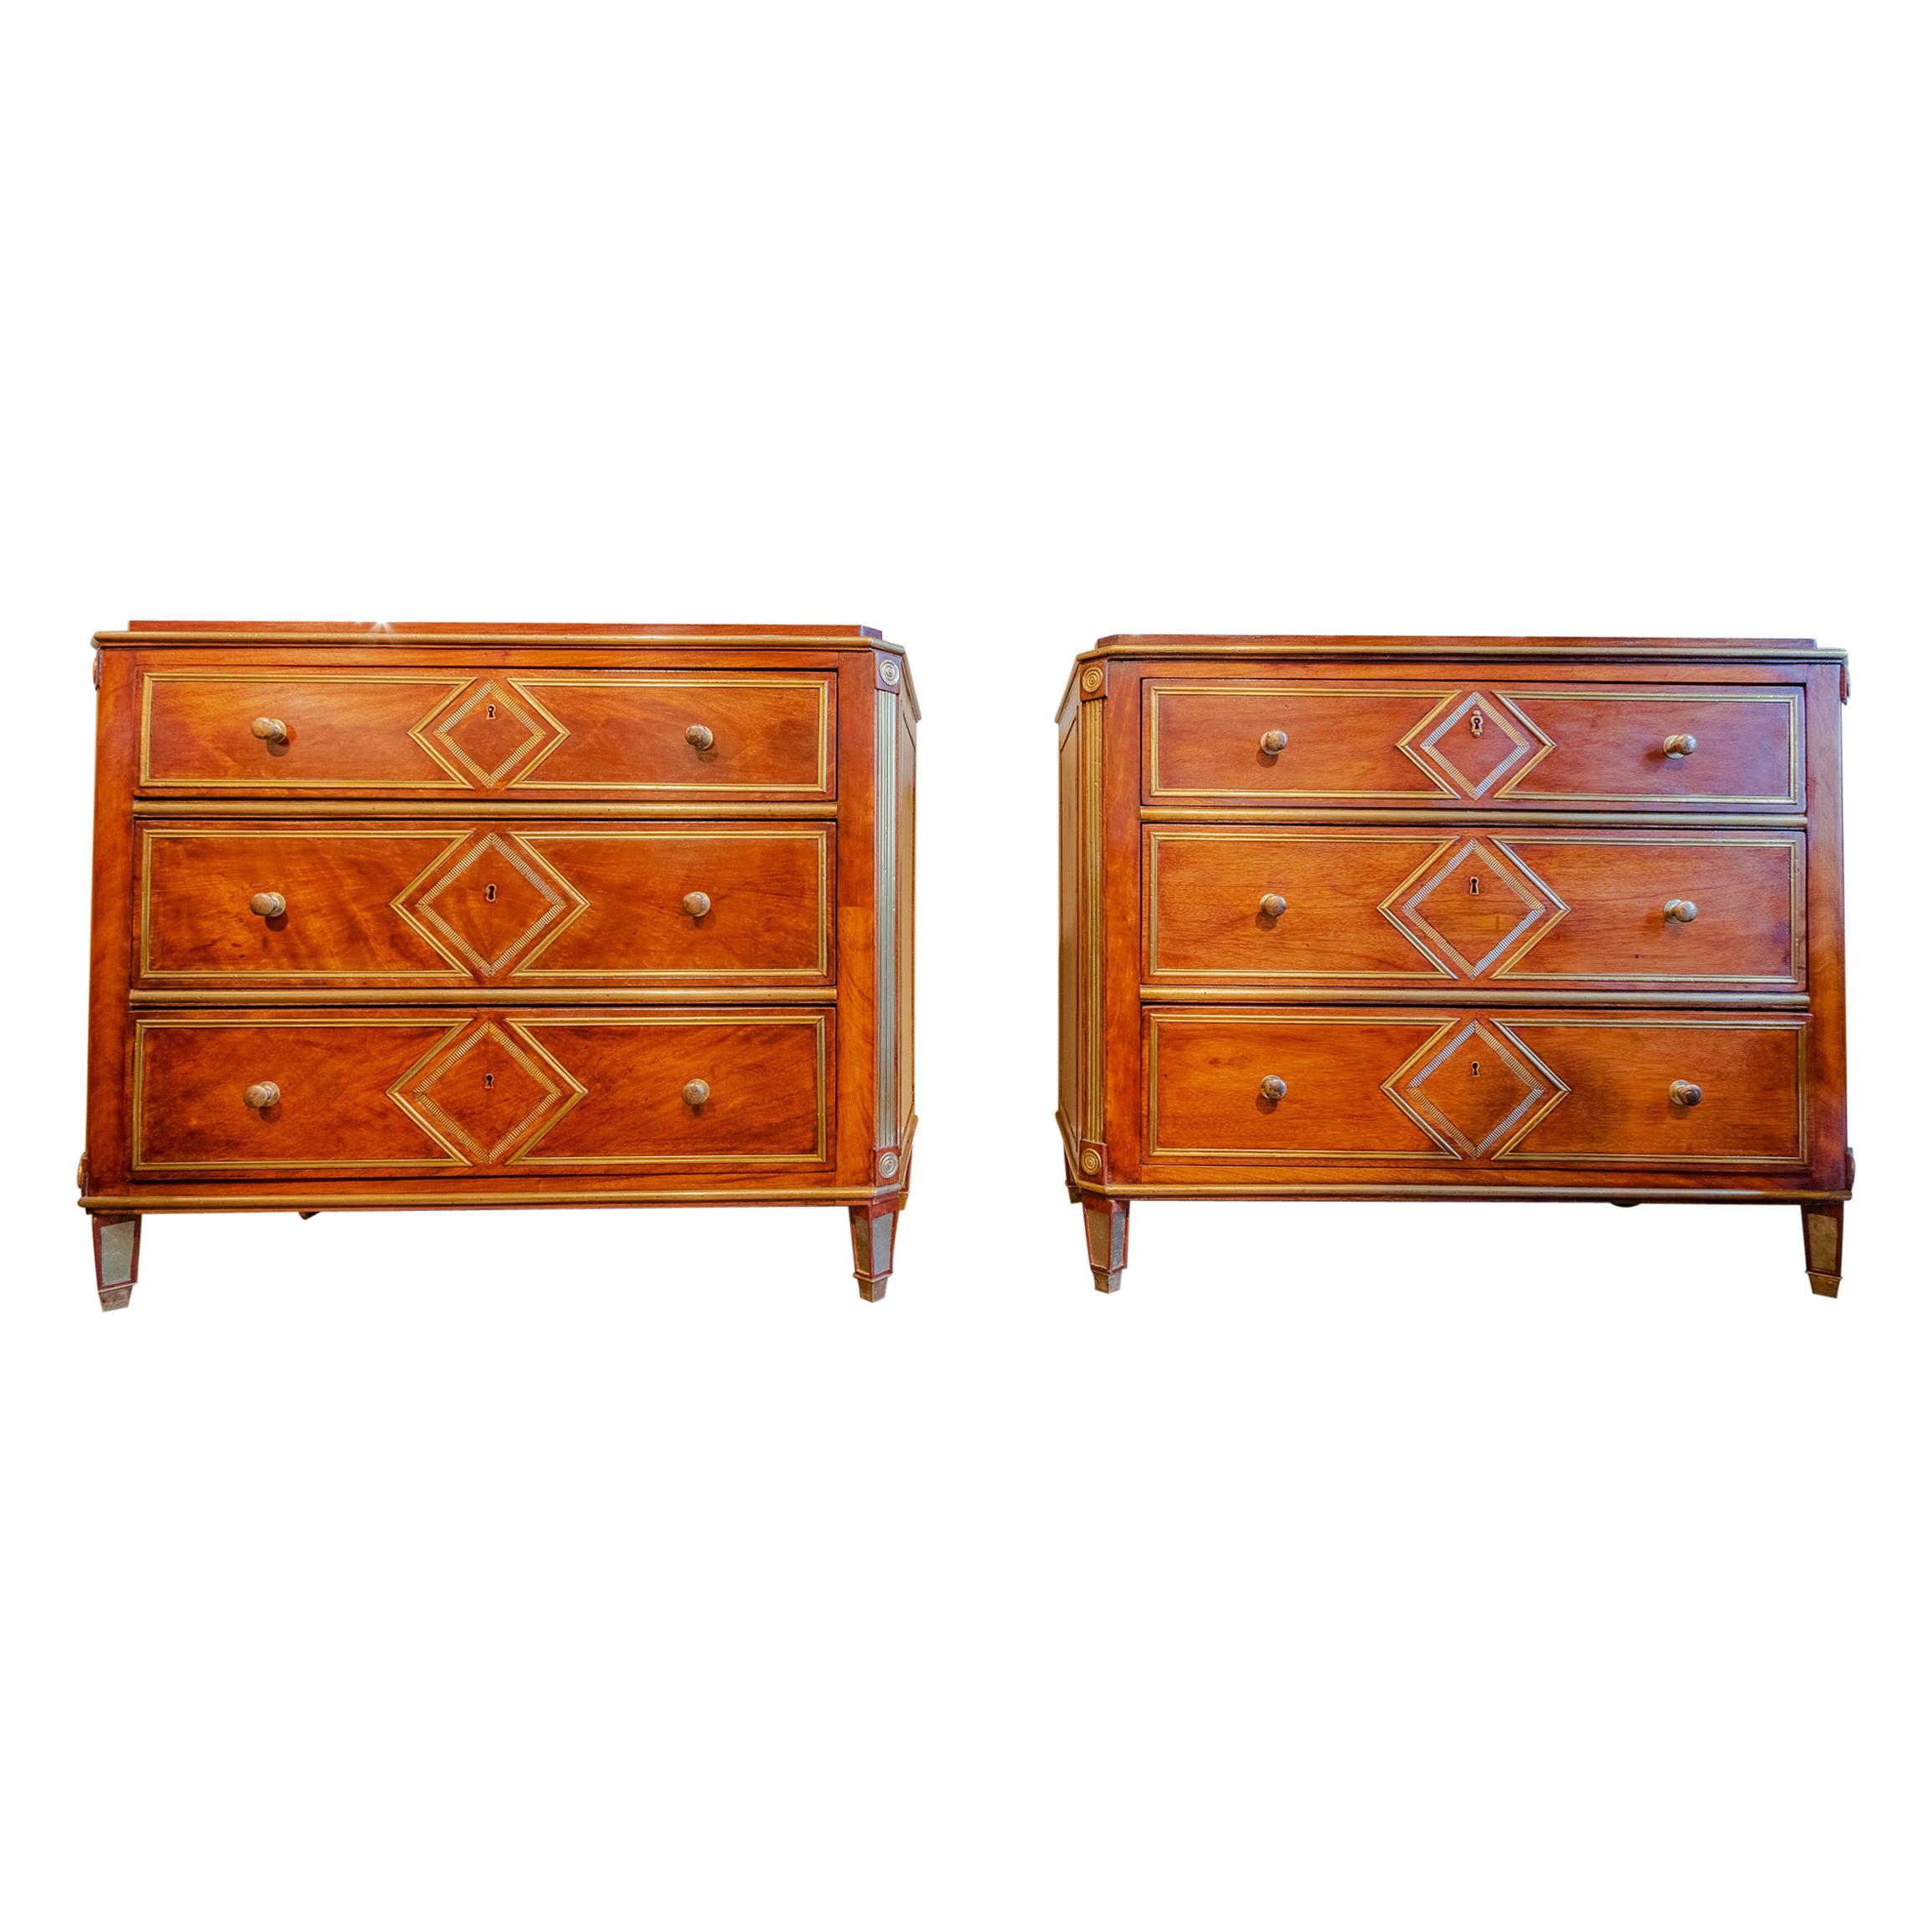 Pair of Late 19th C to Early 20th Century Russian Mahogany and Brass Commodes